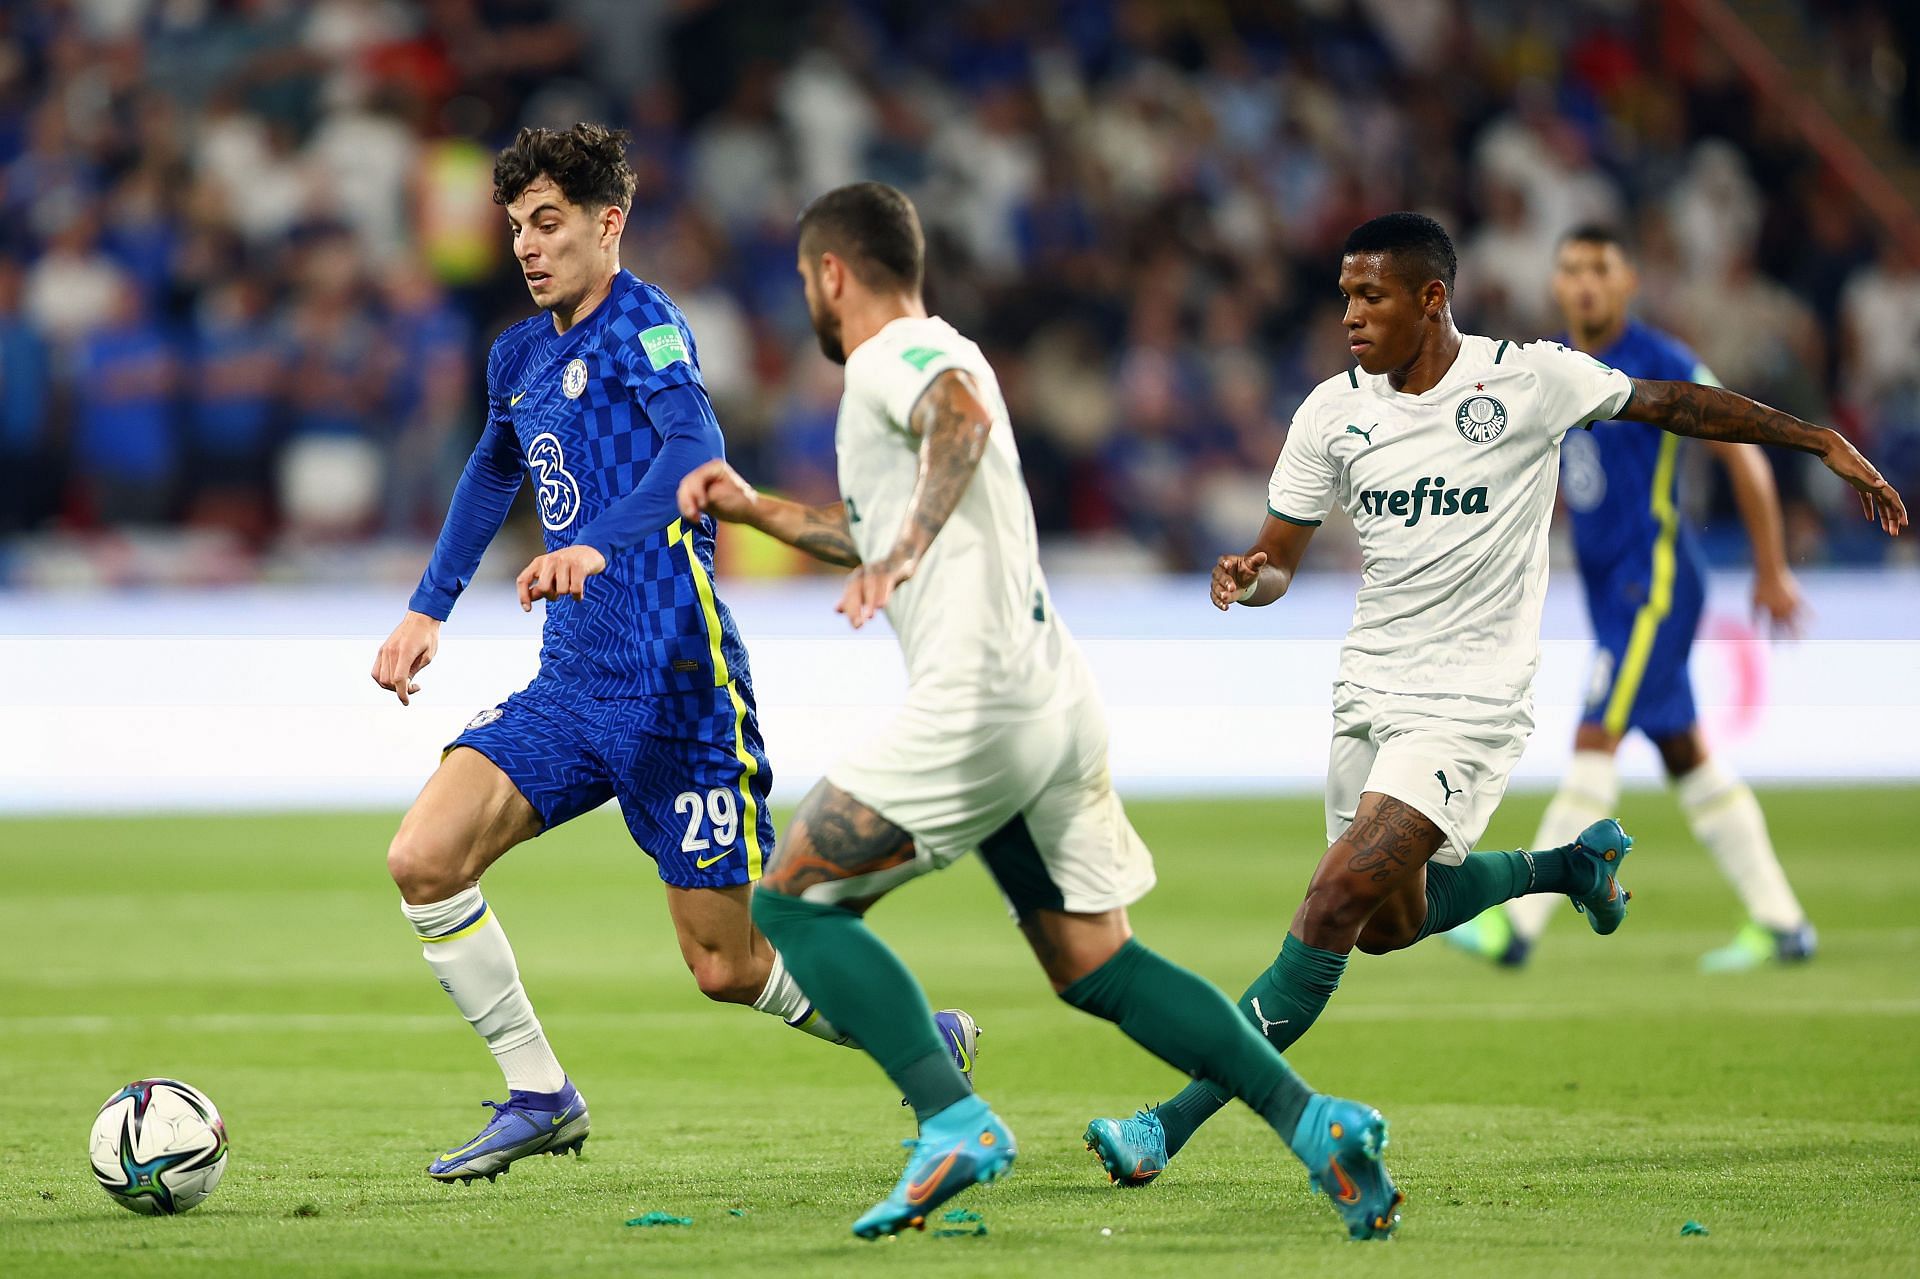 Kai Havertz has now scored in both the Champions League and Club World Cup Final in the last 9 months. Chelsea v Palmeiras: Final - FIFA Club World Cup UAE 2021